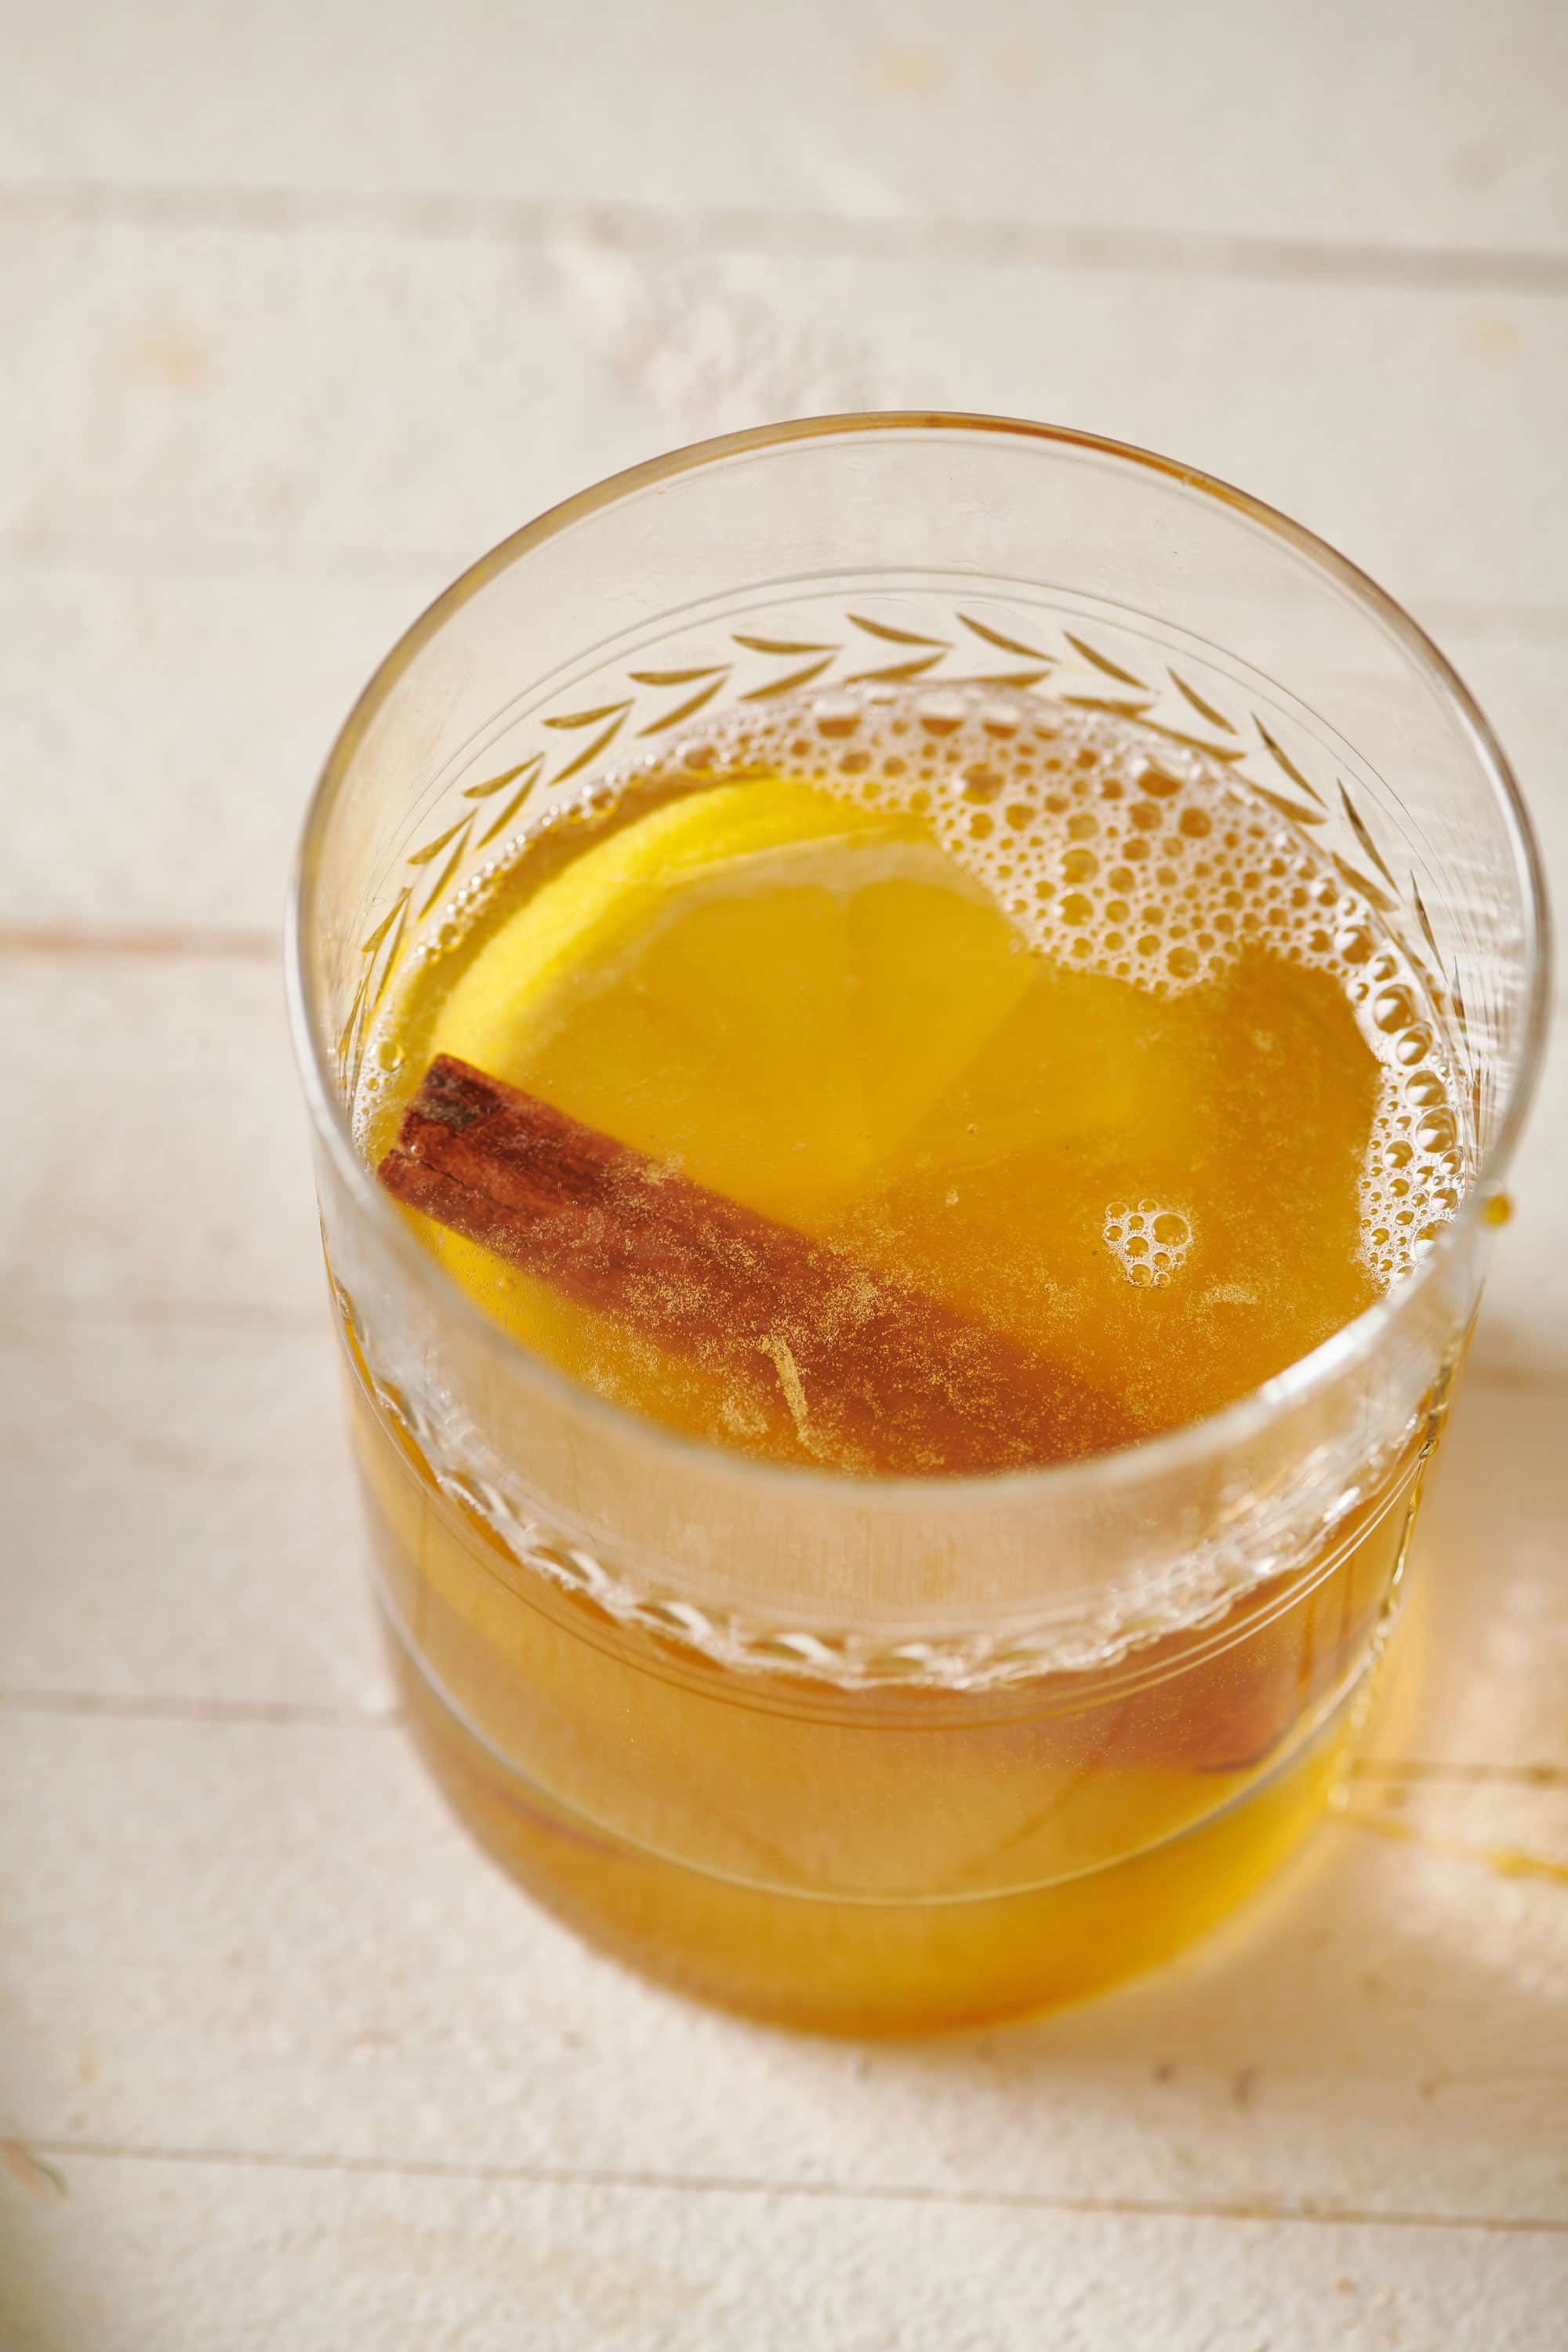 Cinnamon stick and lemon slice in a Hot Toddy.